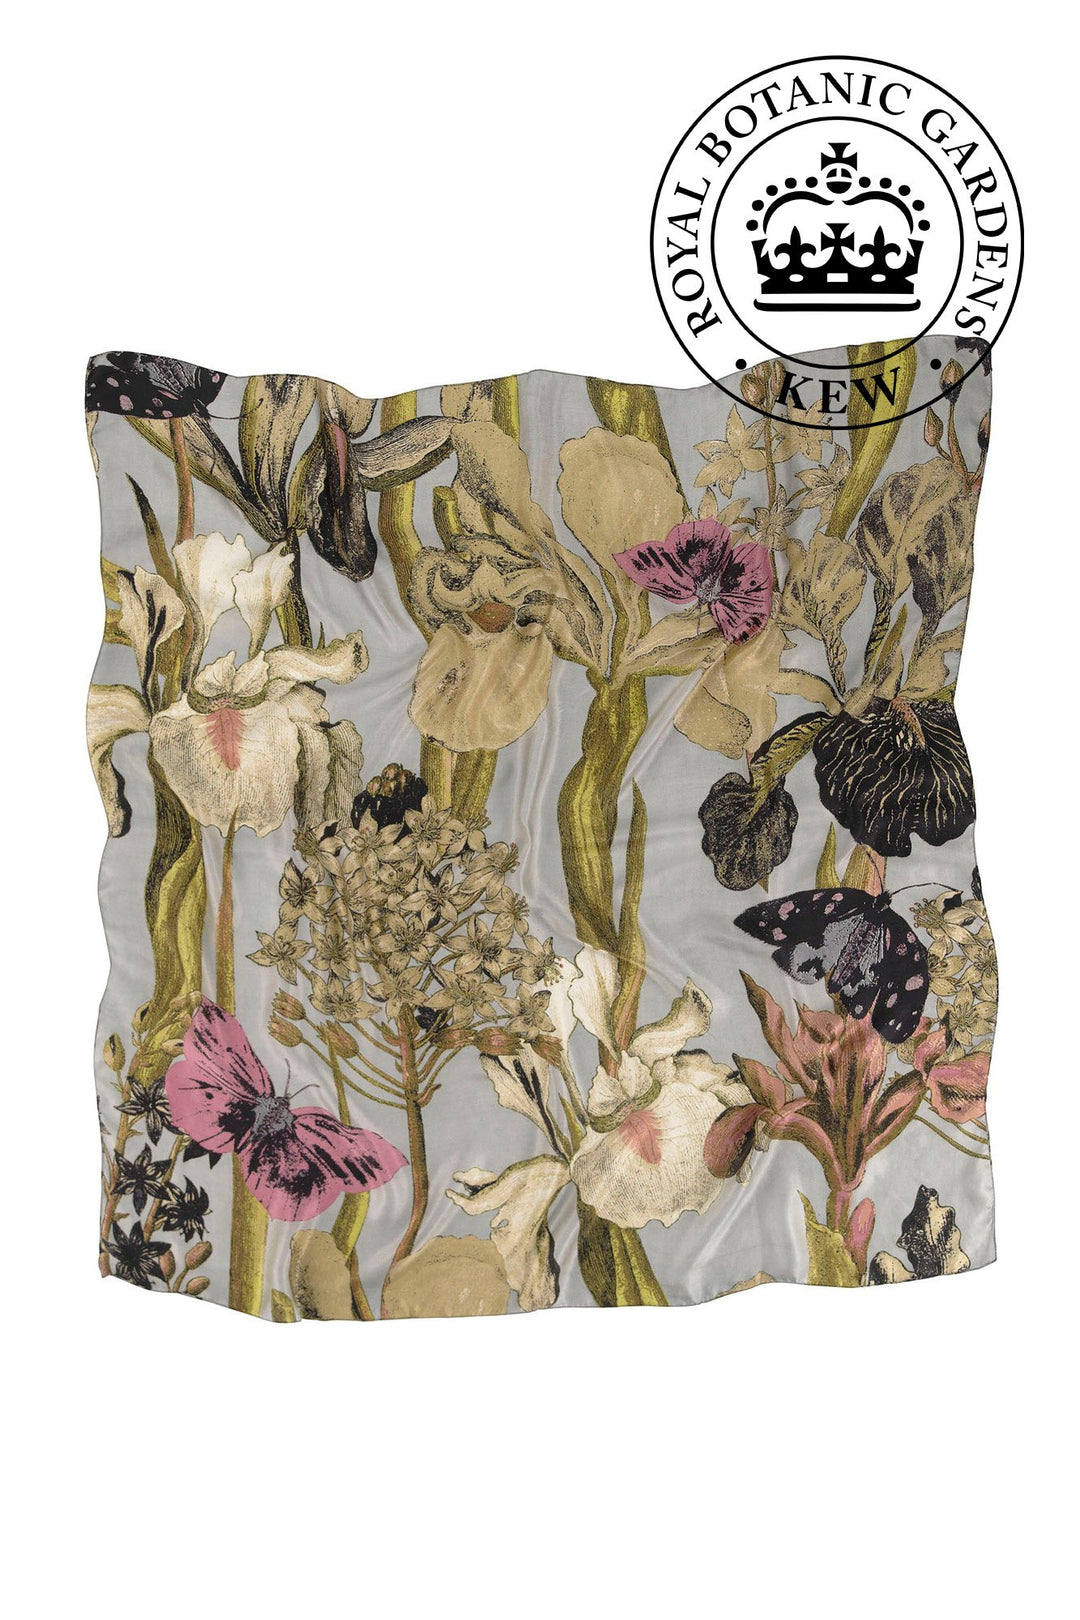 KEW Iris Grey Silk Square Scarf- 100% silk, 100% hand screen printed and a whole 100cm x 100cm of print, this silk scarf oozes luxury whether you wear it knotted around your neck, as a headscarf or fastened around the handle of your favourite handbag. 